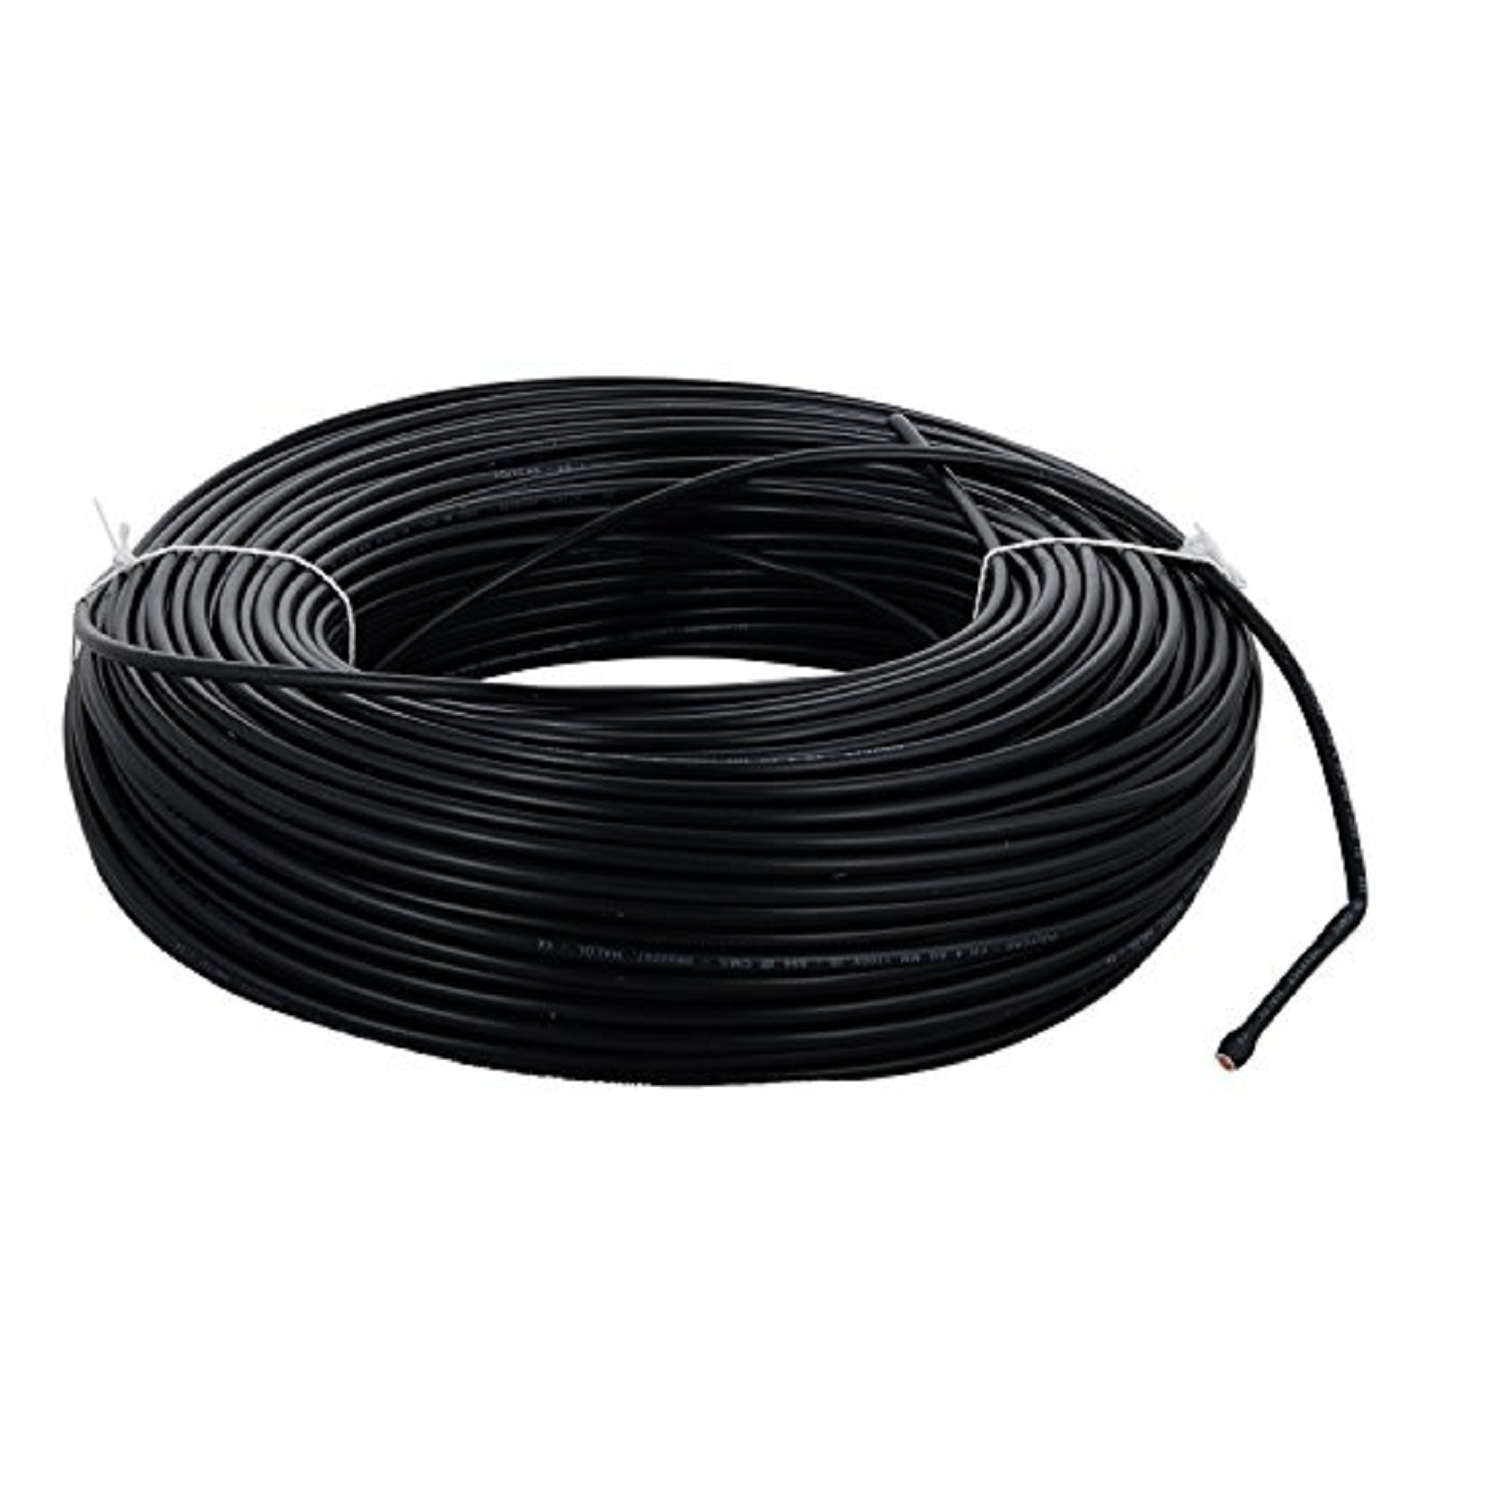 Polycab FR-LS 2.5 SQ-MM, (300 Meters) PVC Insulated Copper Wire Single Core (Black)